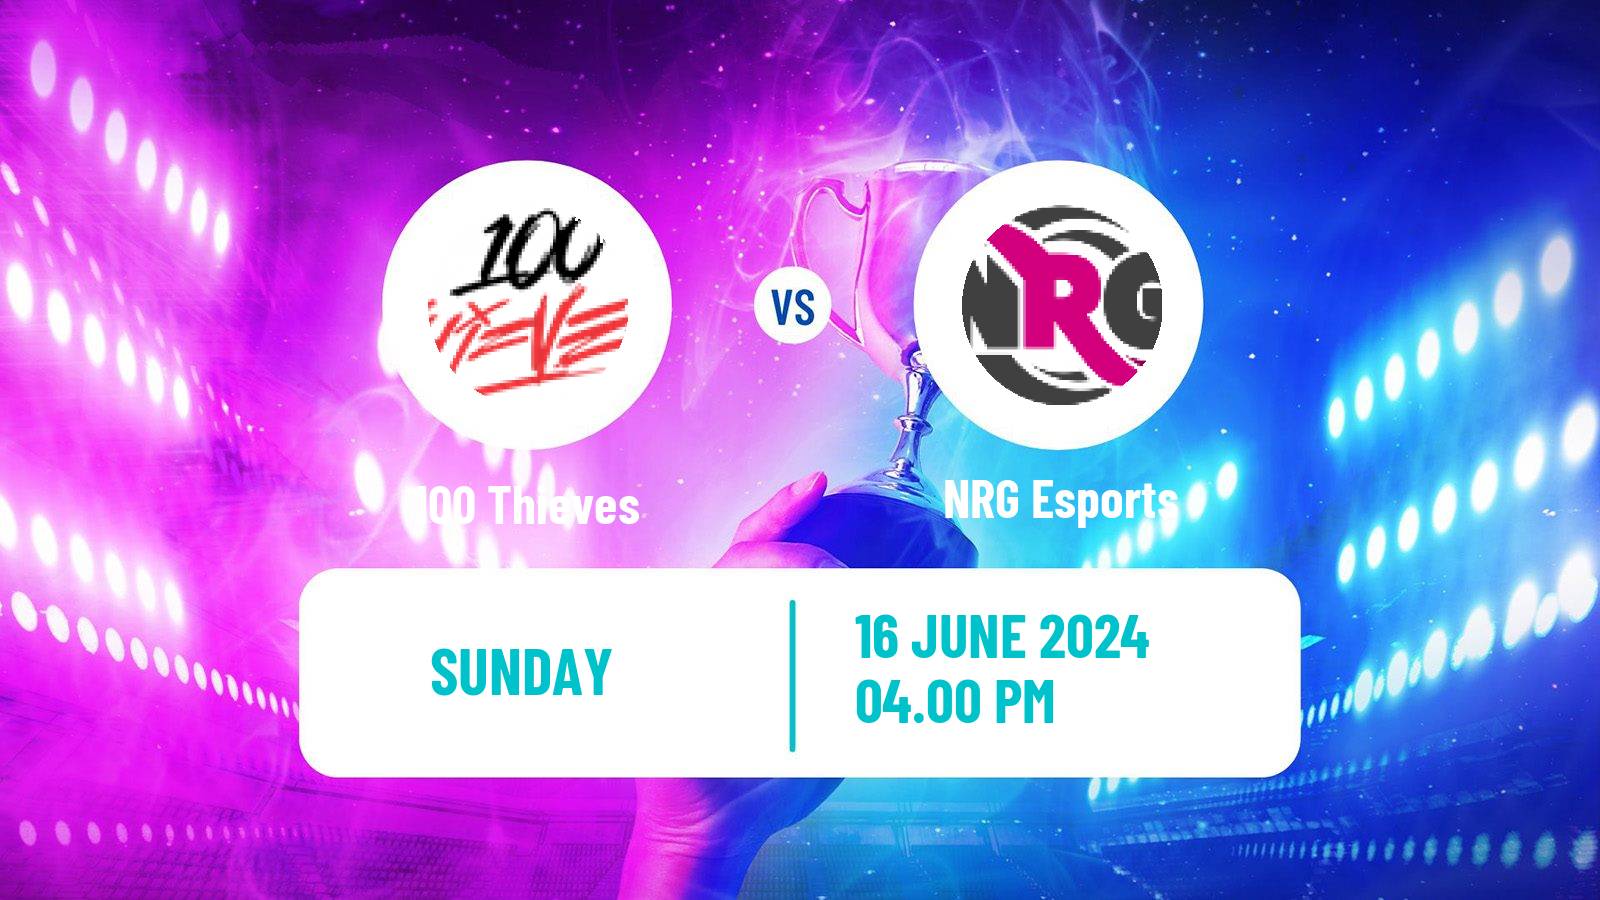 Esports League Of Legends Lcs 100 Thieves - NRG Esports